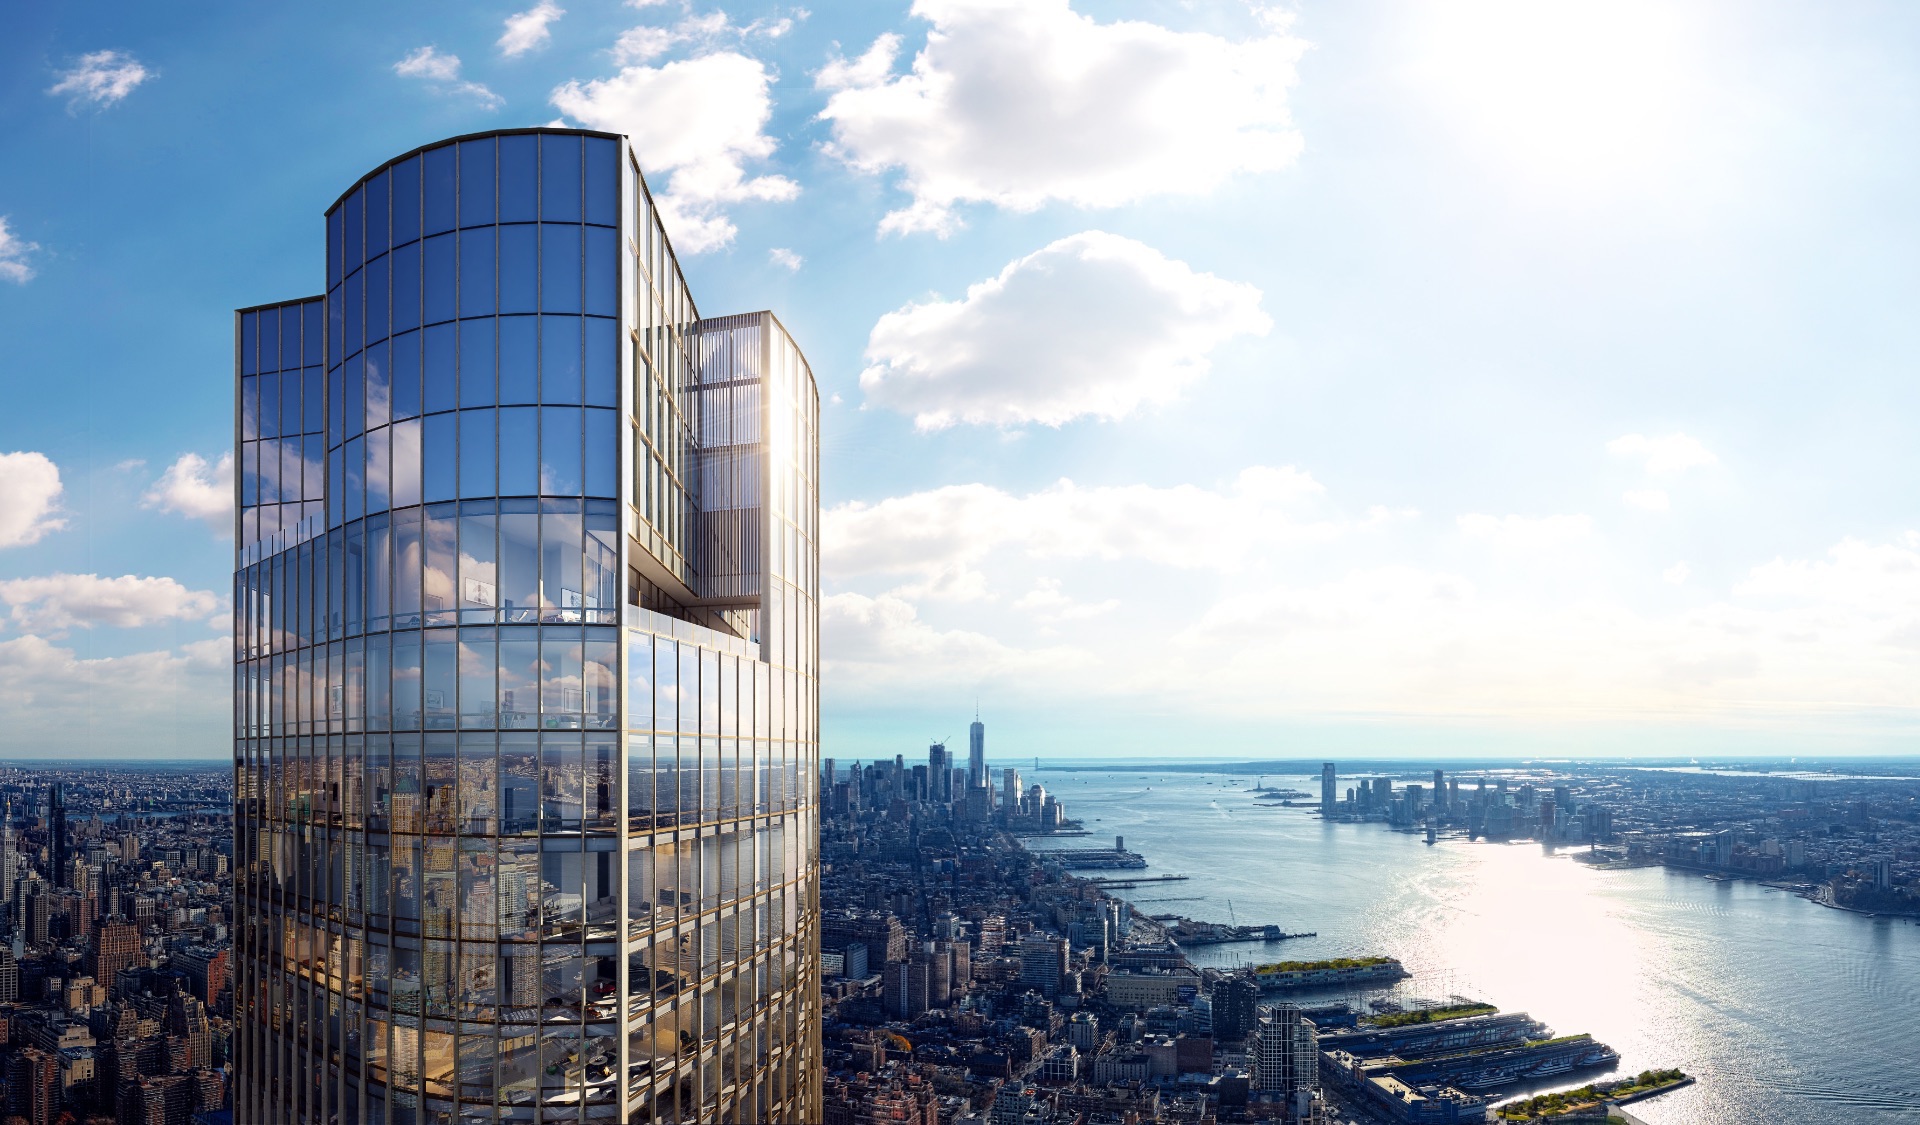 The penthouses at 35 Hudson Yards